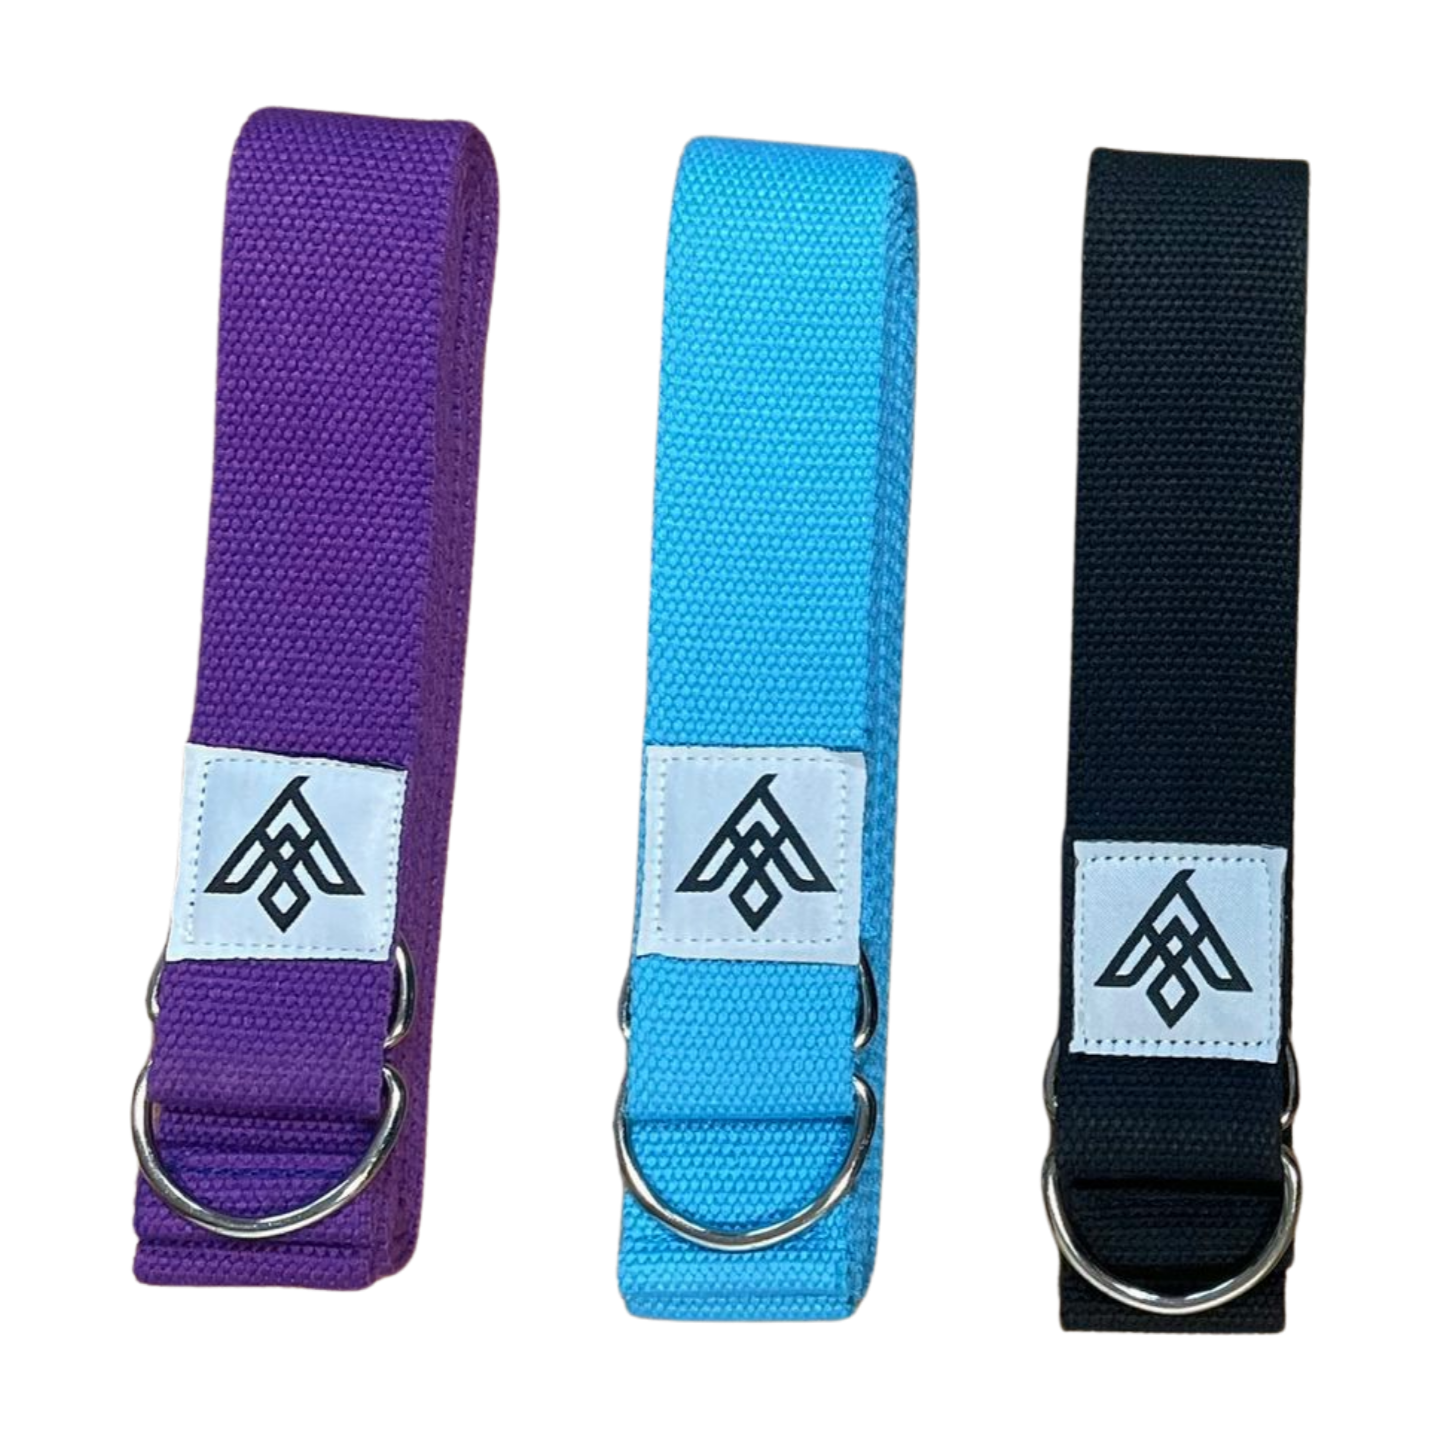 Odyssey Yoga Strap color assortment (amethyst, turquoise, onyx)